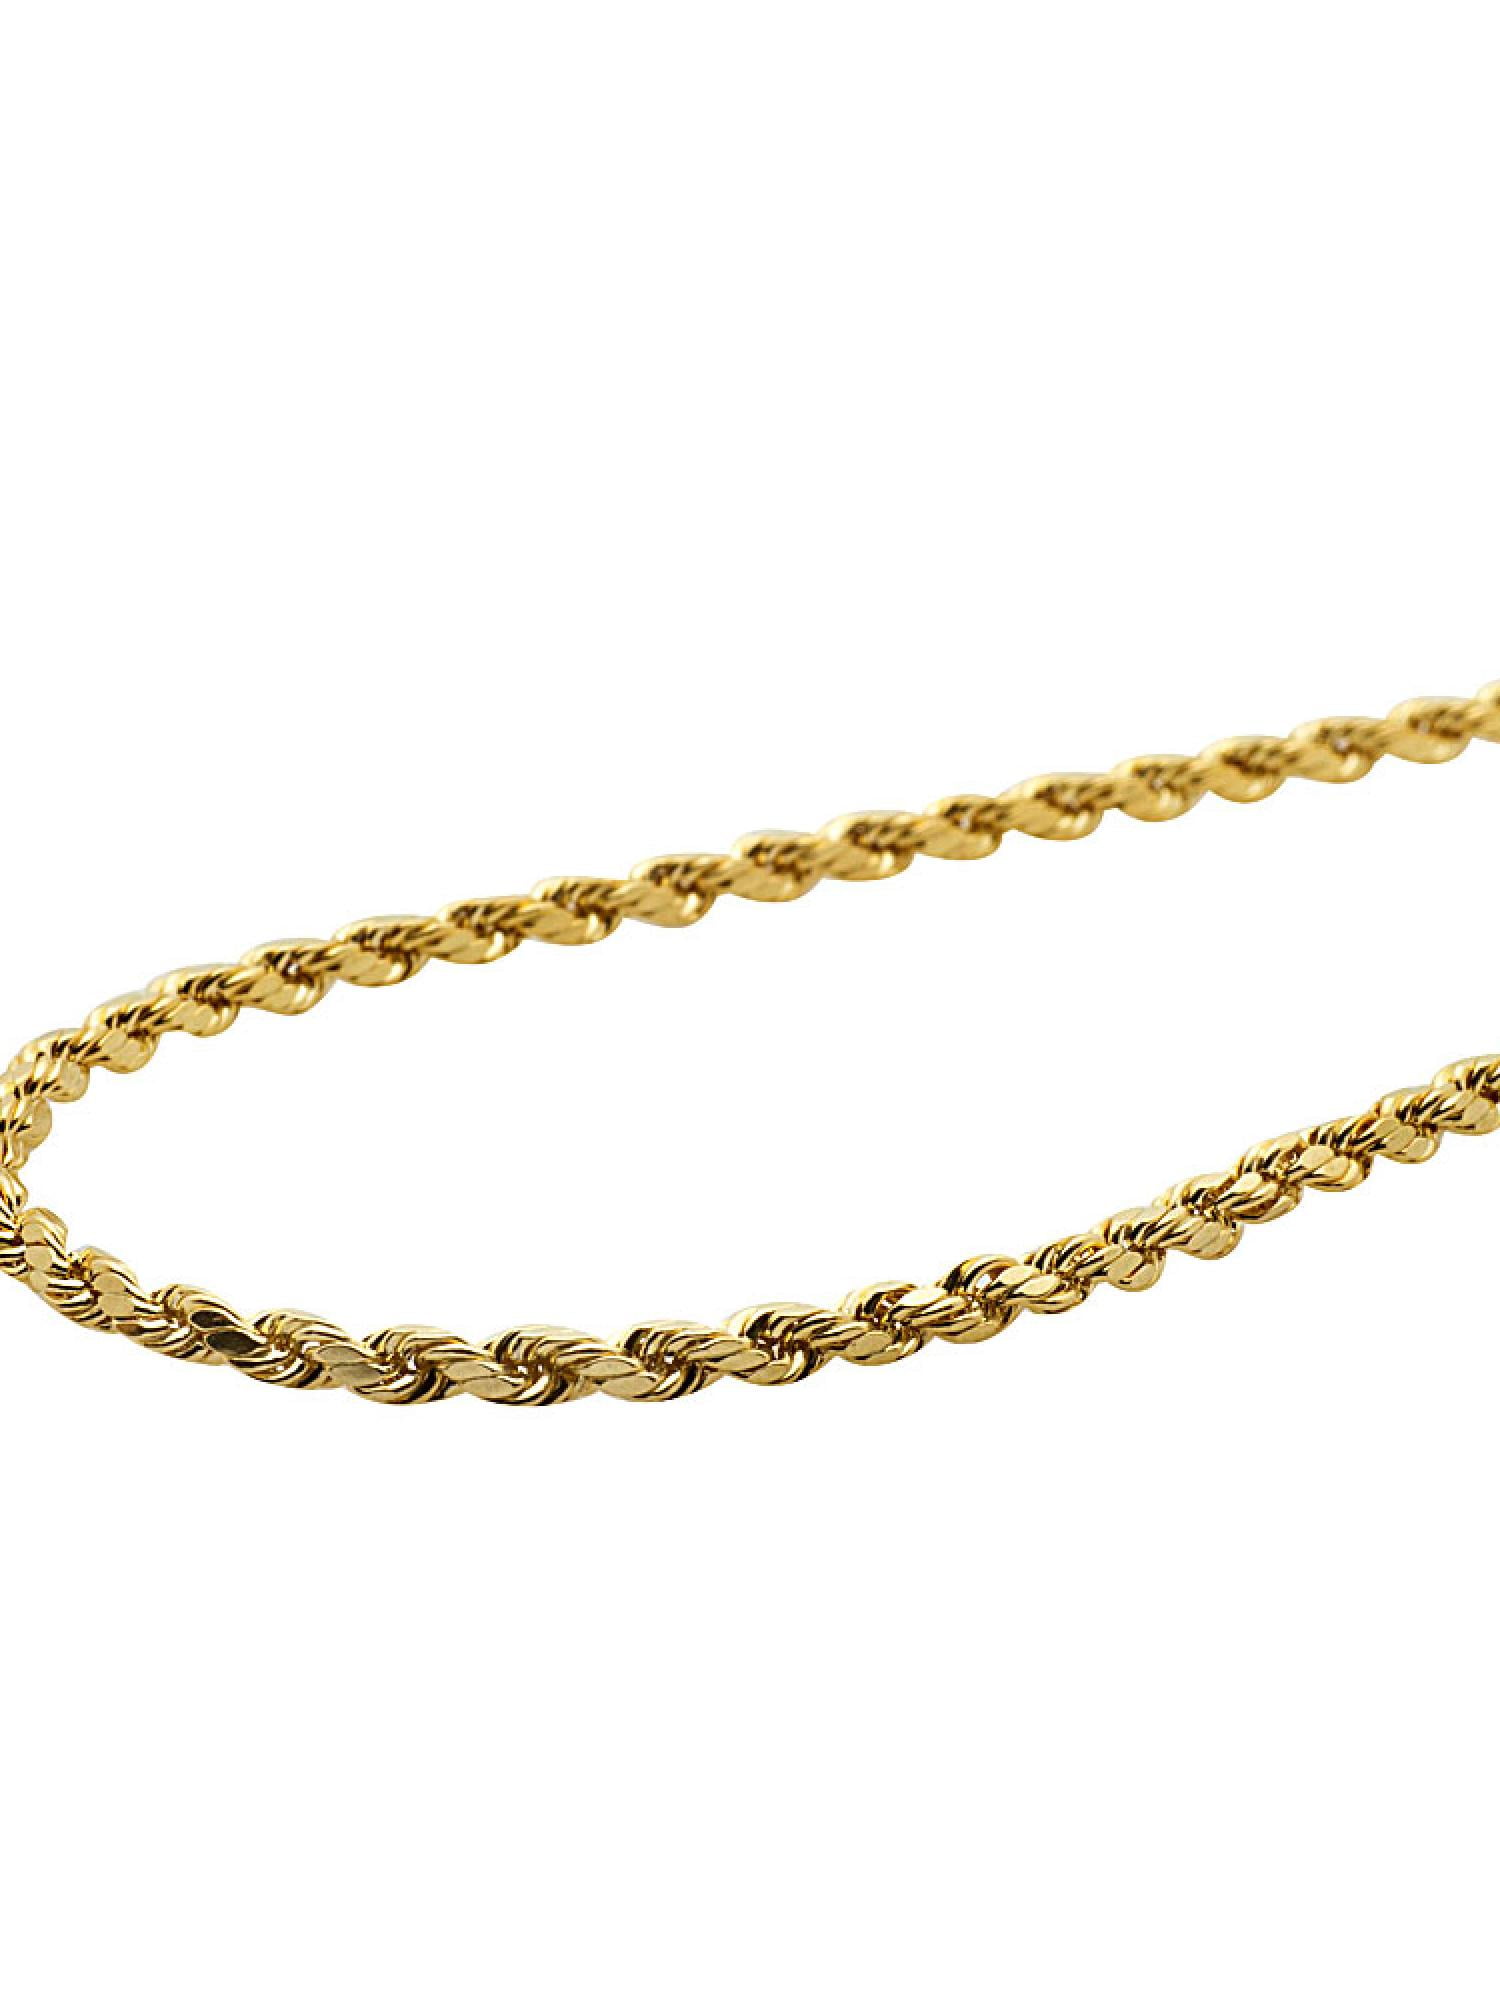 Men's/Ladies Genuine 10K Yellow Gold 2MM Hollow Rope Chain Necklace 16"-28" New